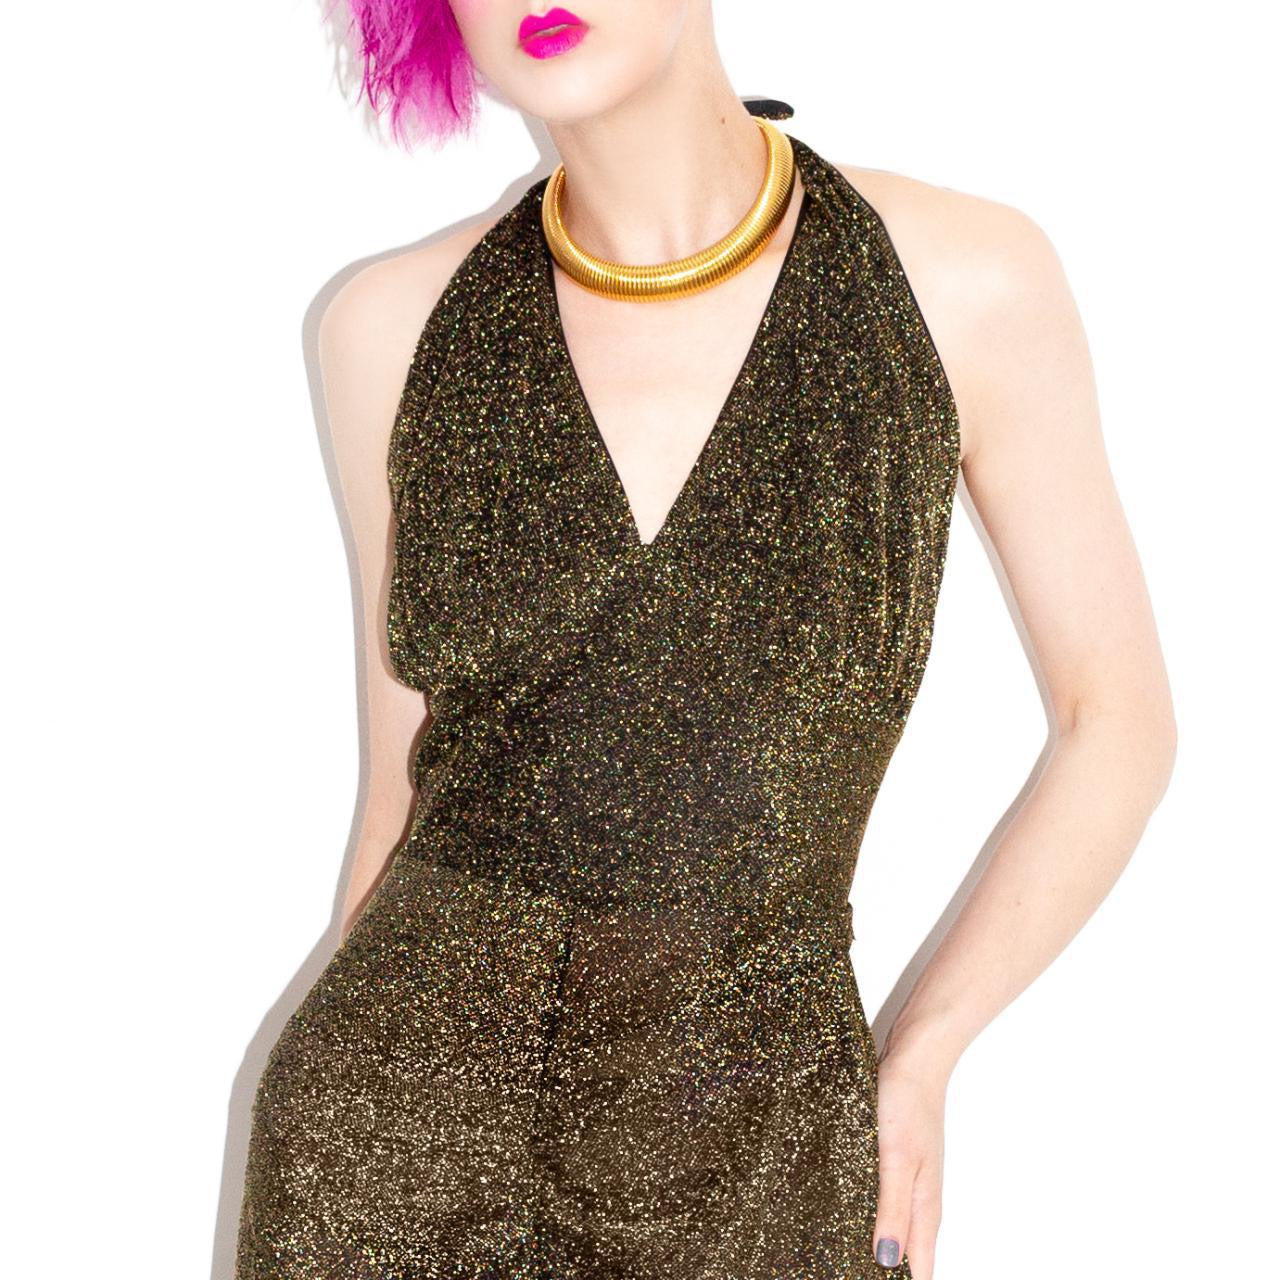 Disco Lady Dress - Adult Costume | Party Delights